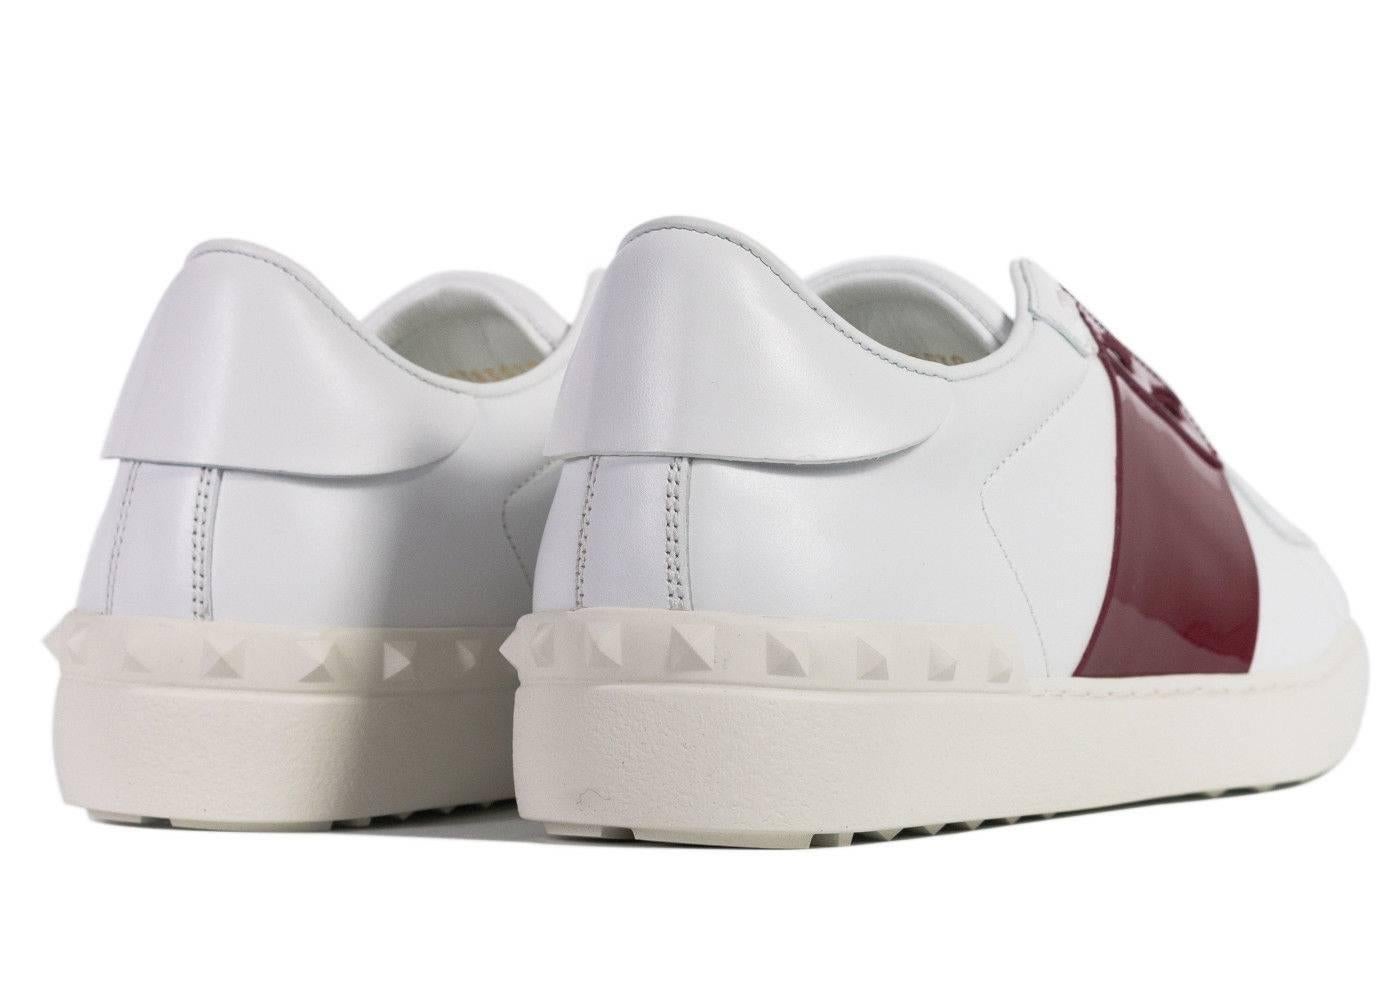 Brand New Valentino Patent and Leather Open Sneakers
Original Tags and Dust Bag Included
Retails in Stores & Online for $645
Mens Size EUR 42/ US 9 Fits True to Size

The Valentino 'Open Sneaker' will be your calm essential for the year. Lace